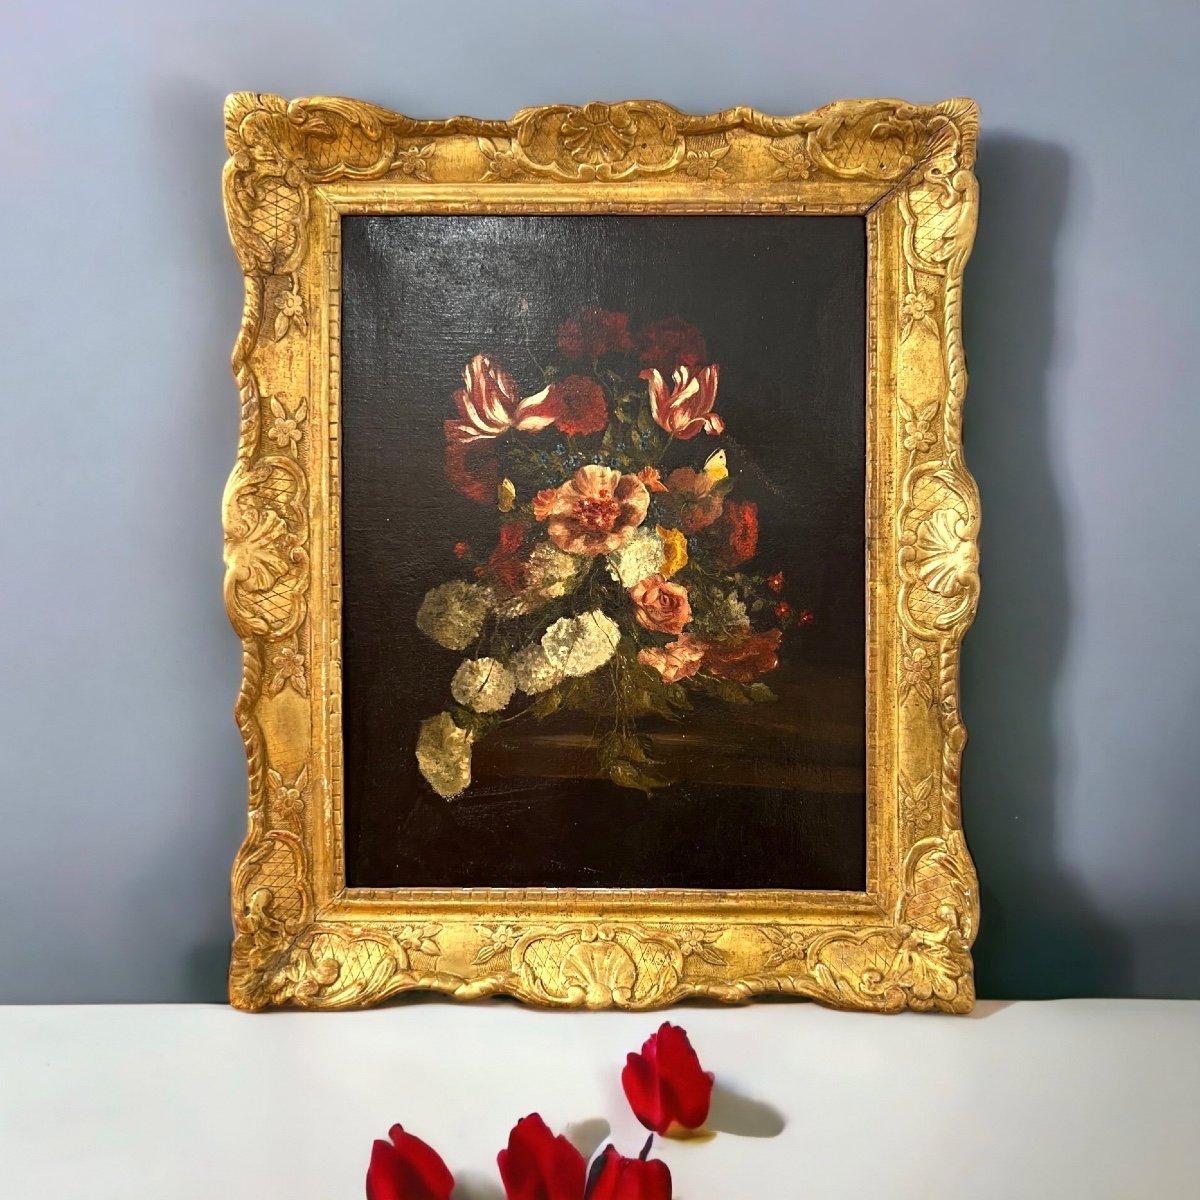 We present you this oil-on-canvas painting representing a refined arrangement of flowers in vibrant colours against a deep-dark backdrop within a splendid 19th-century gilded frame. The frame is enhanced with delicate gold leaf decorative motifs. It